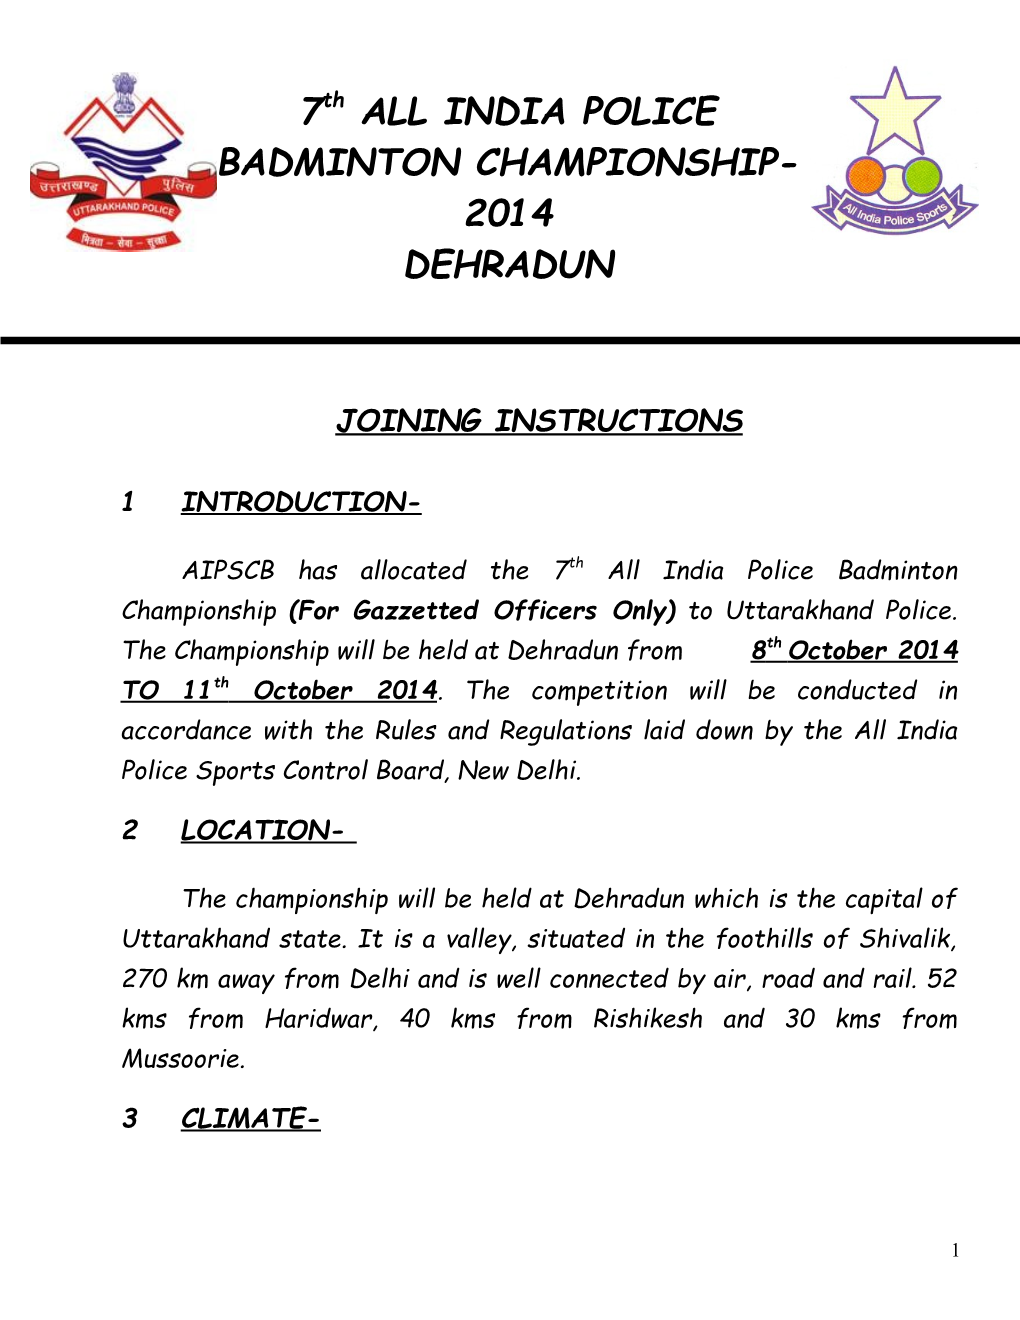 JOINING INSTRUCTION ALONG with RULES and REGULATIONS for the 7Th ALL INDIA POLICE LAWN